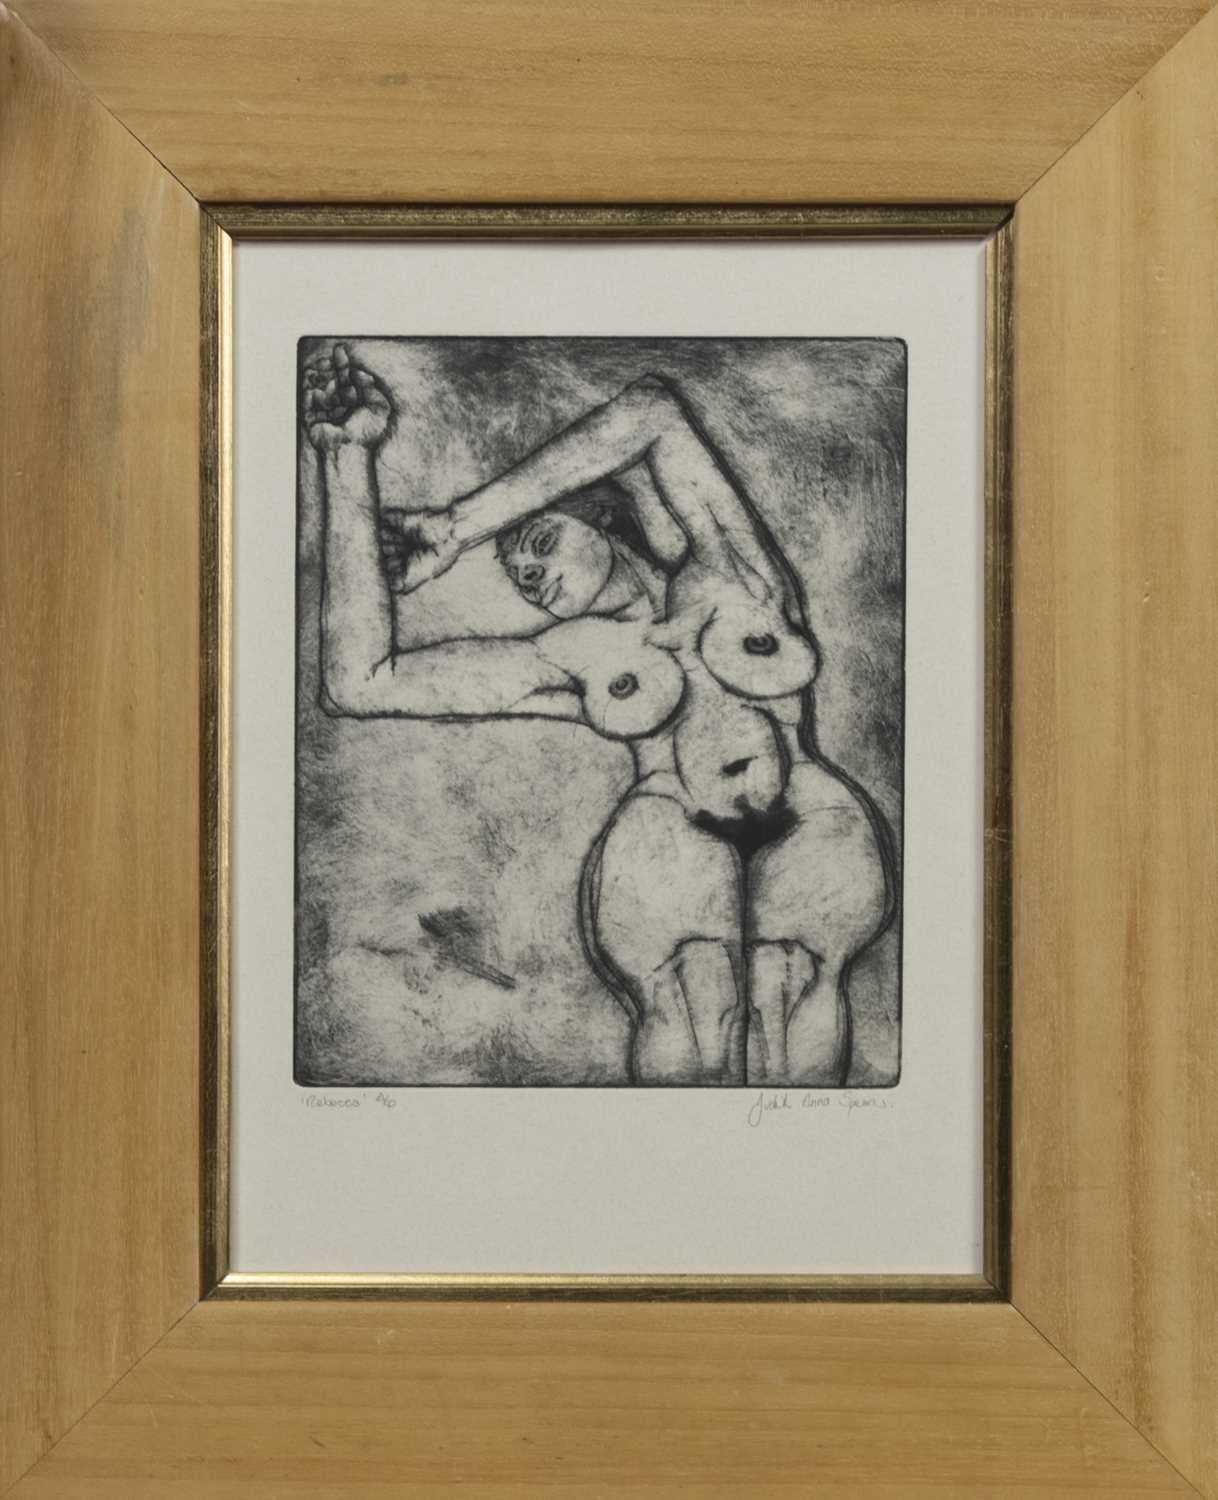 Lot 46 - REBECCA, A DRYPOINT BY JUDITH ANNA SPENCE